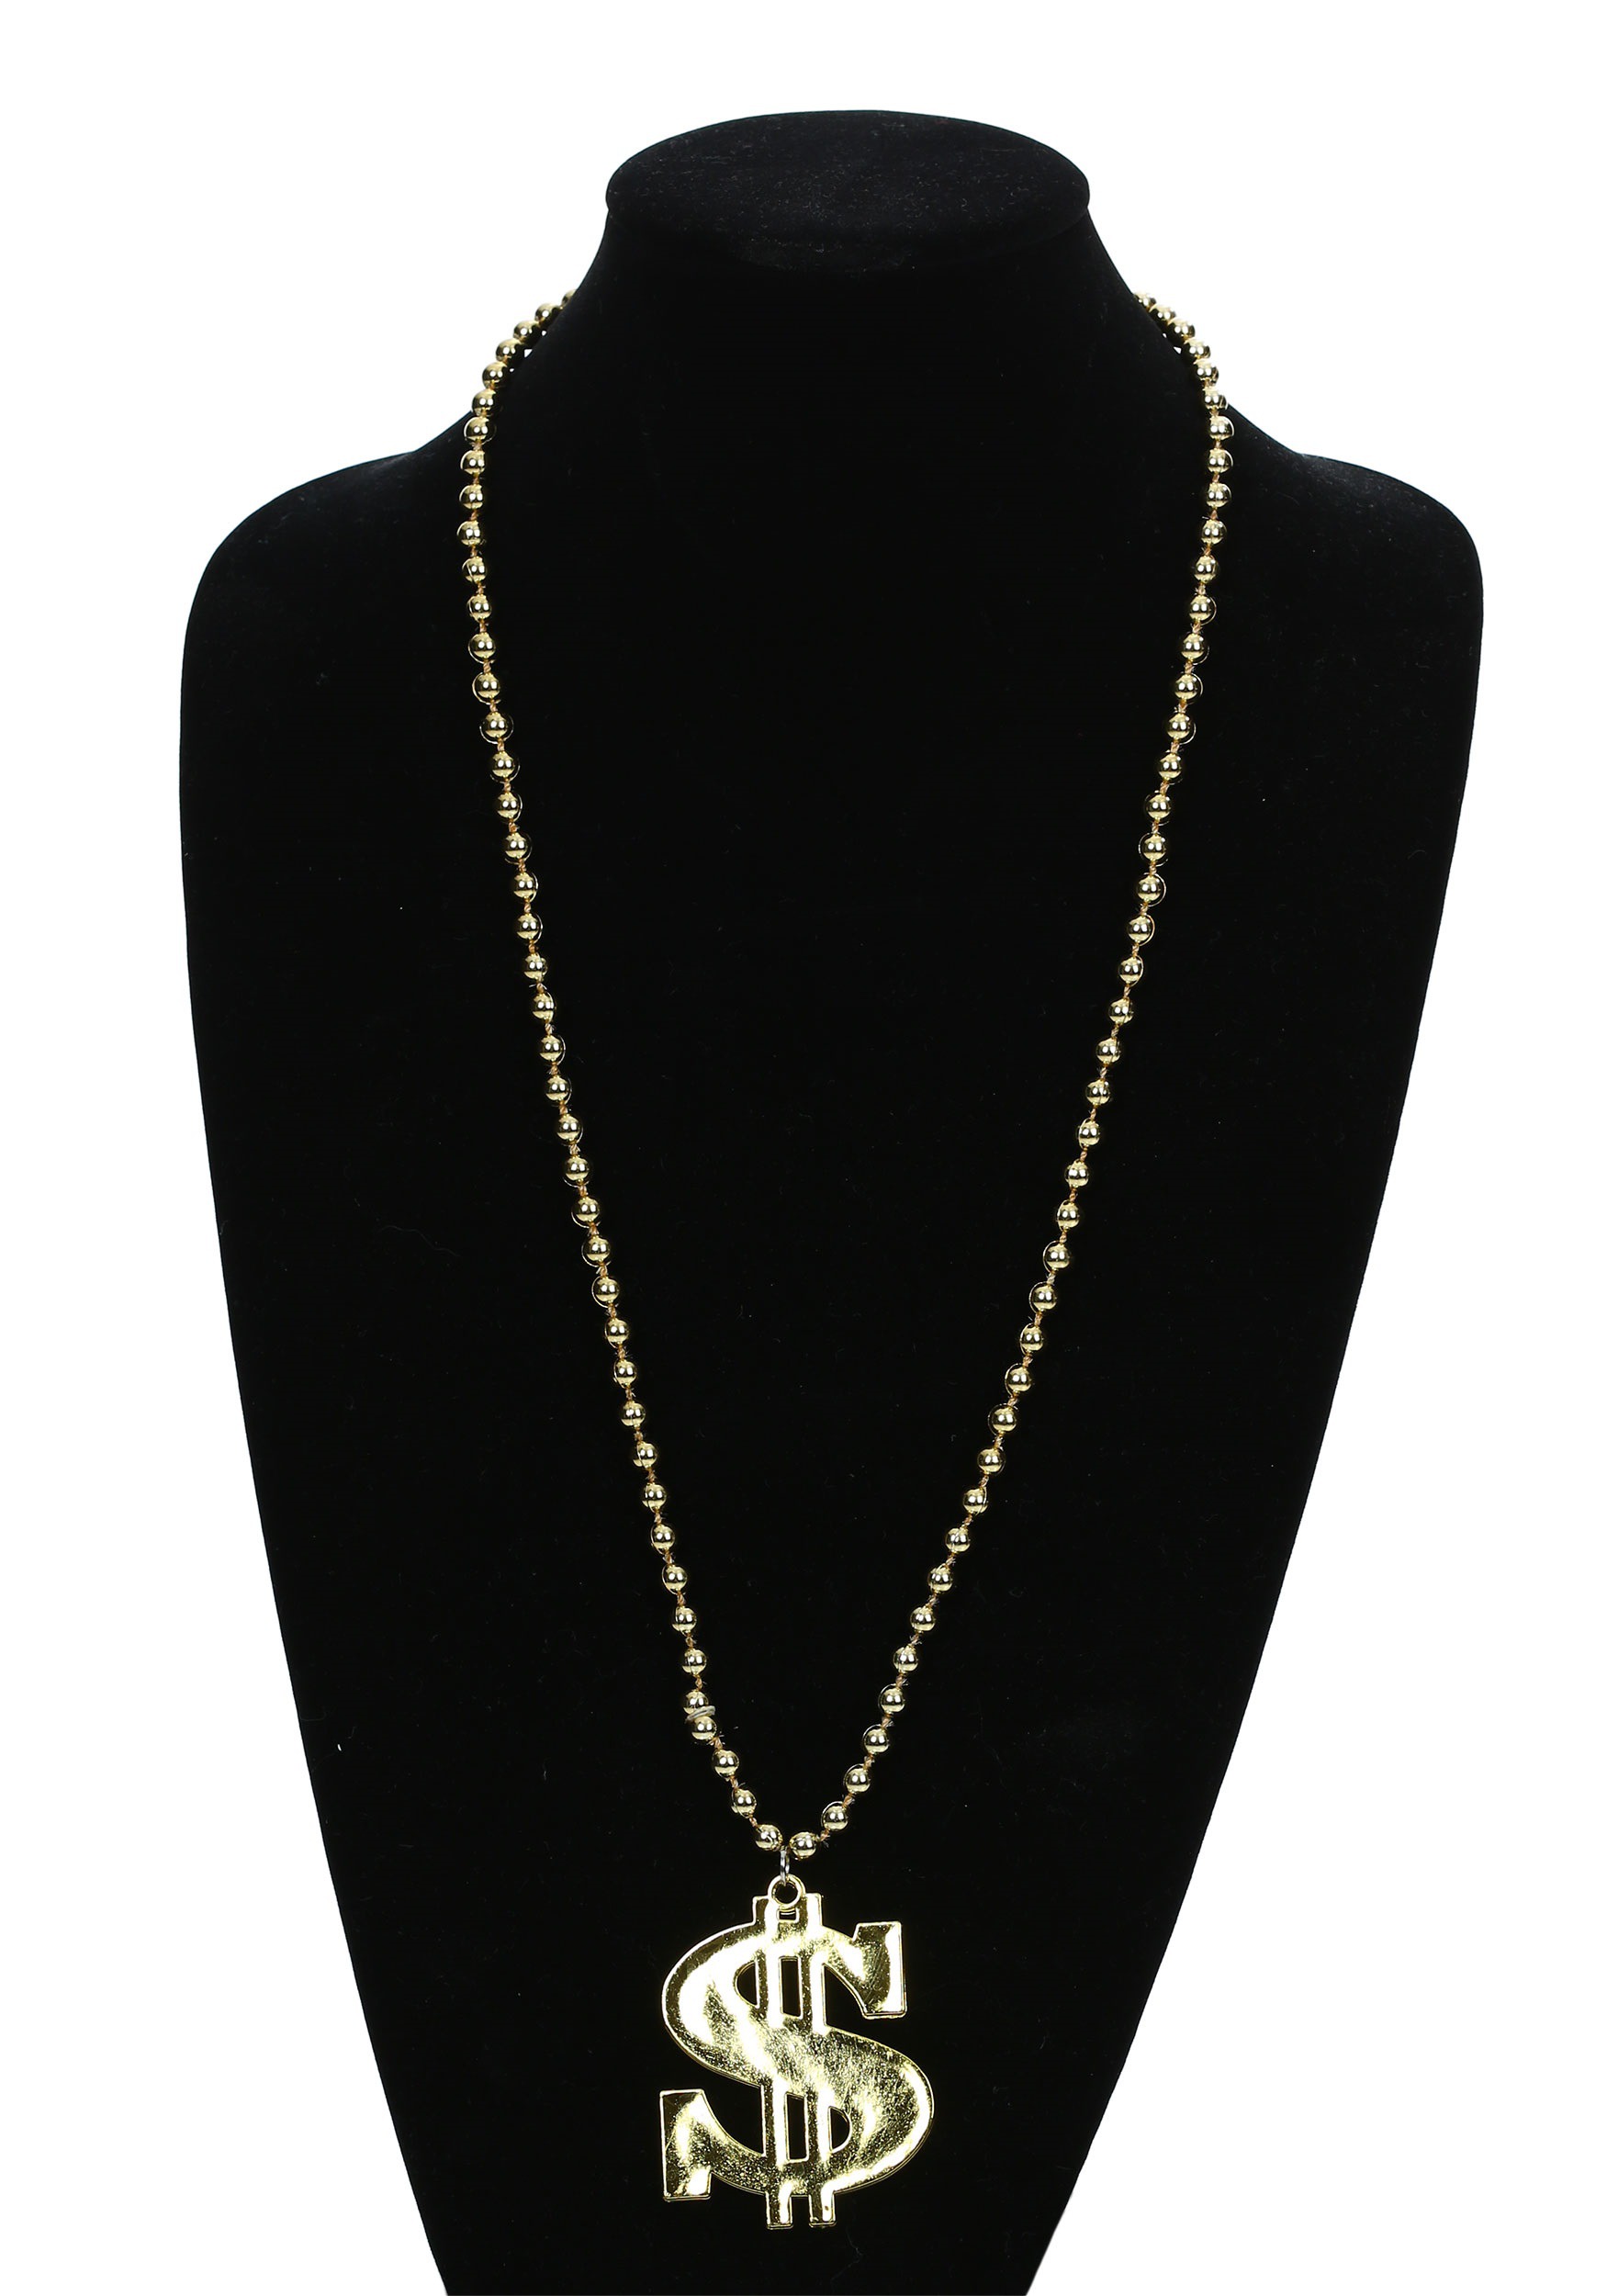 Deluxe Dollar Sign Costume Necklace